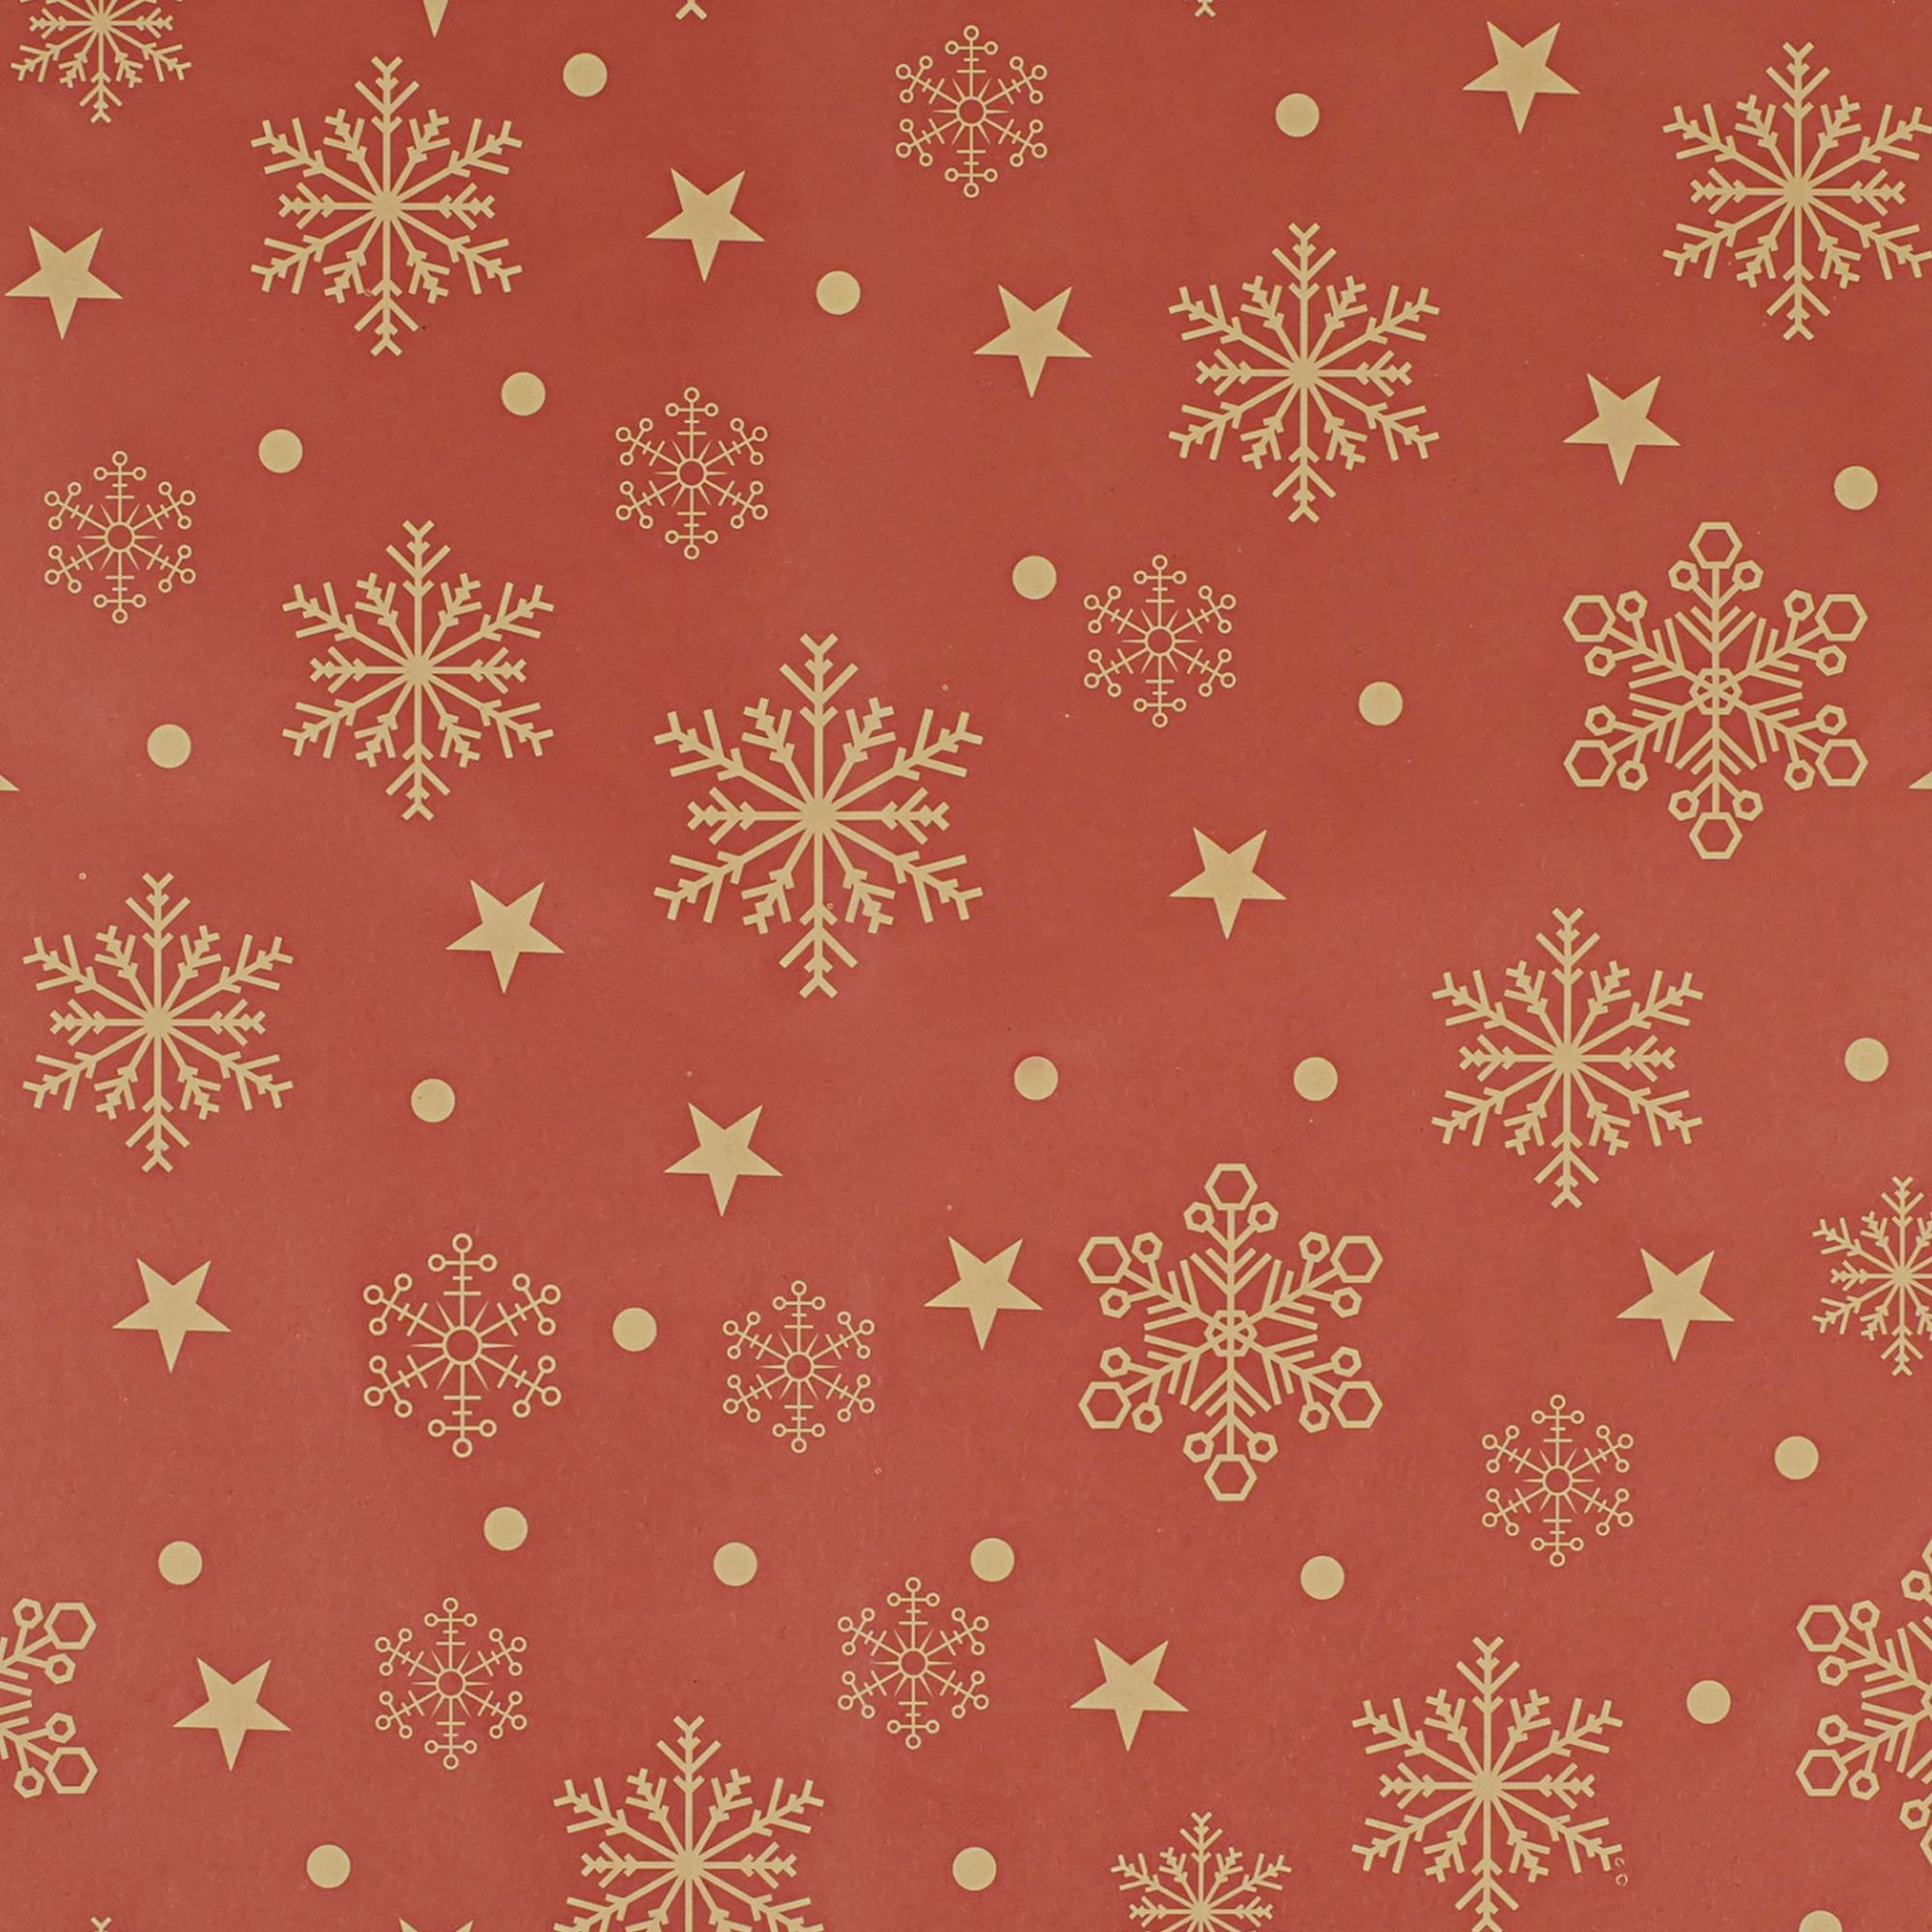 Jiemi Christmas Wrapping Paper_Snowflake_Red Background